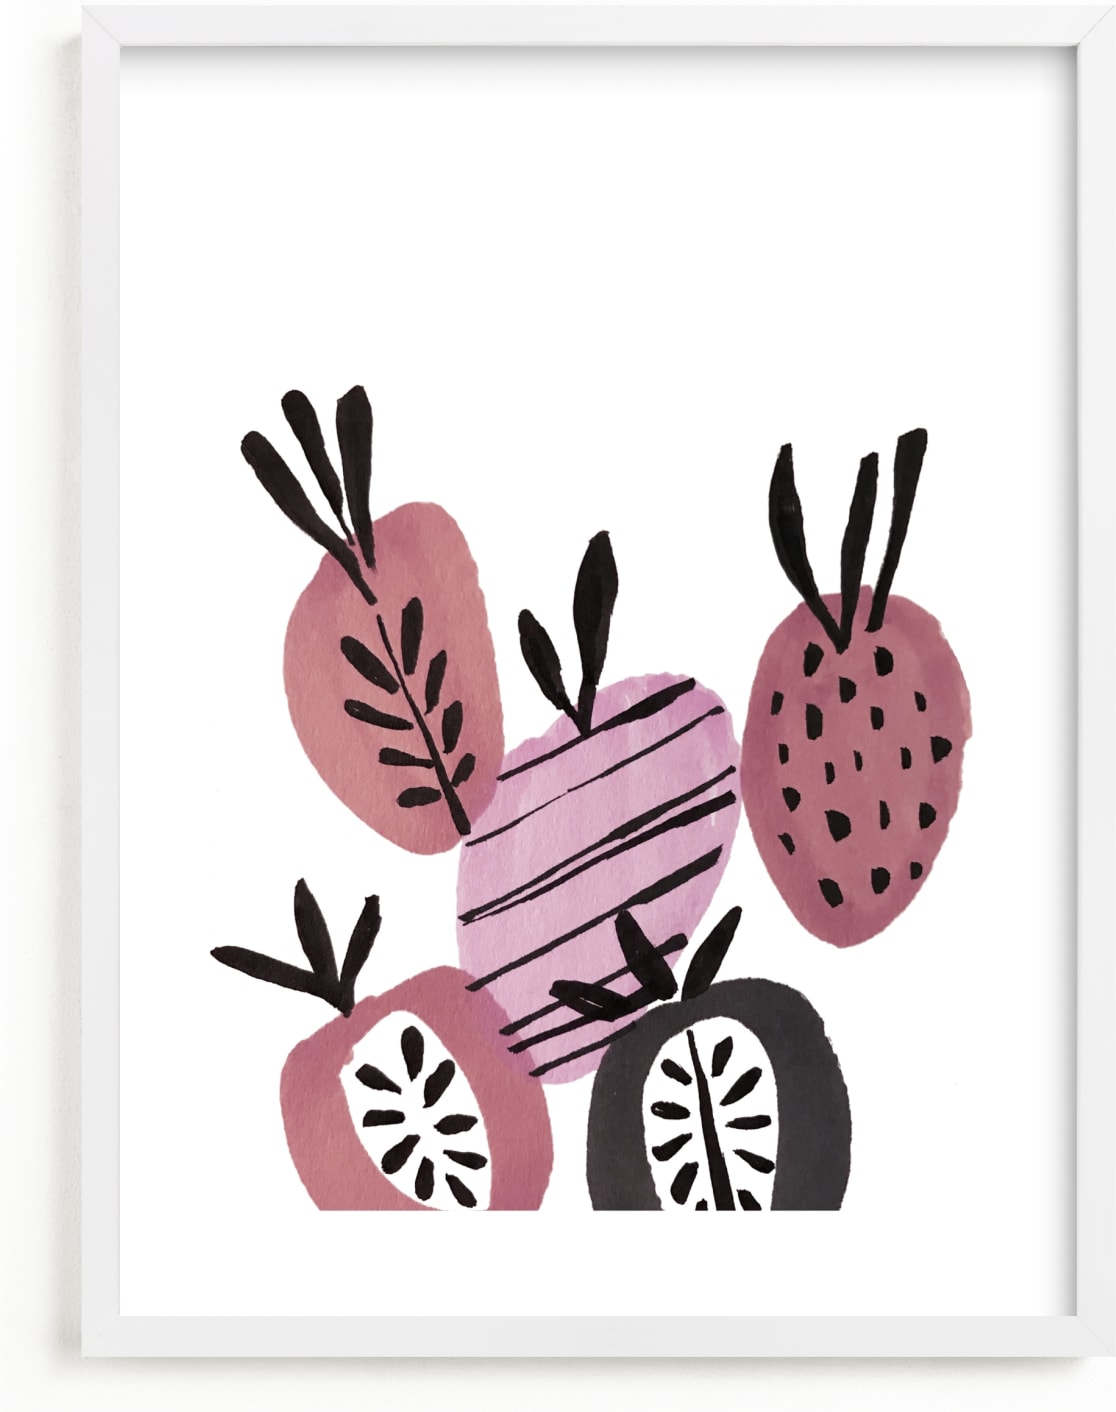 This is a pink kids wall art by Jenna Skead called Mipina.